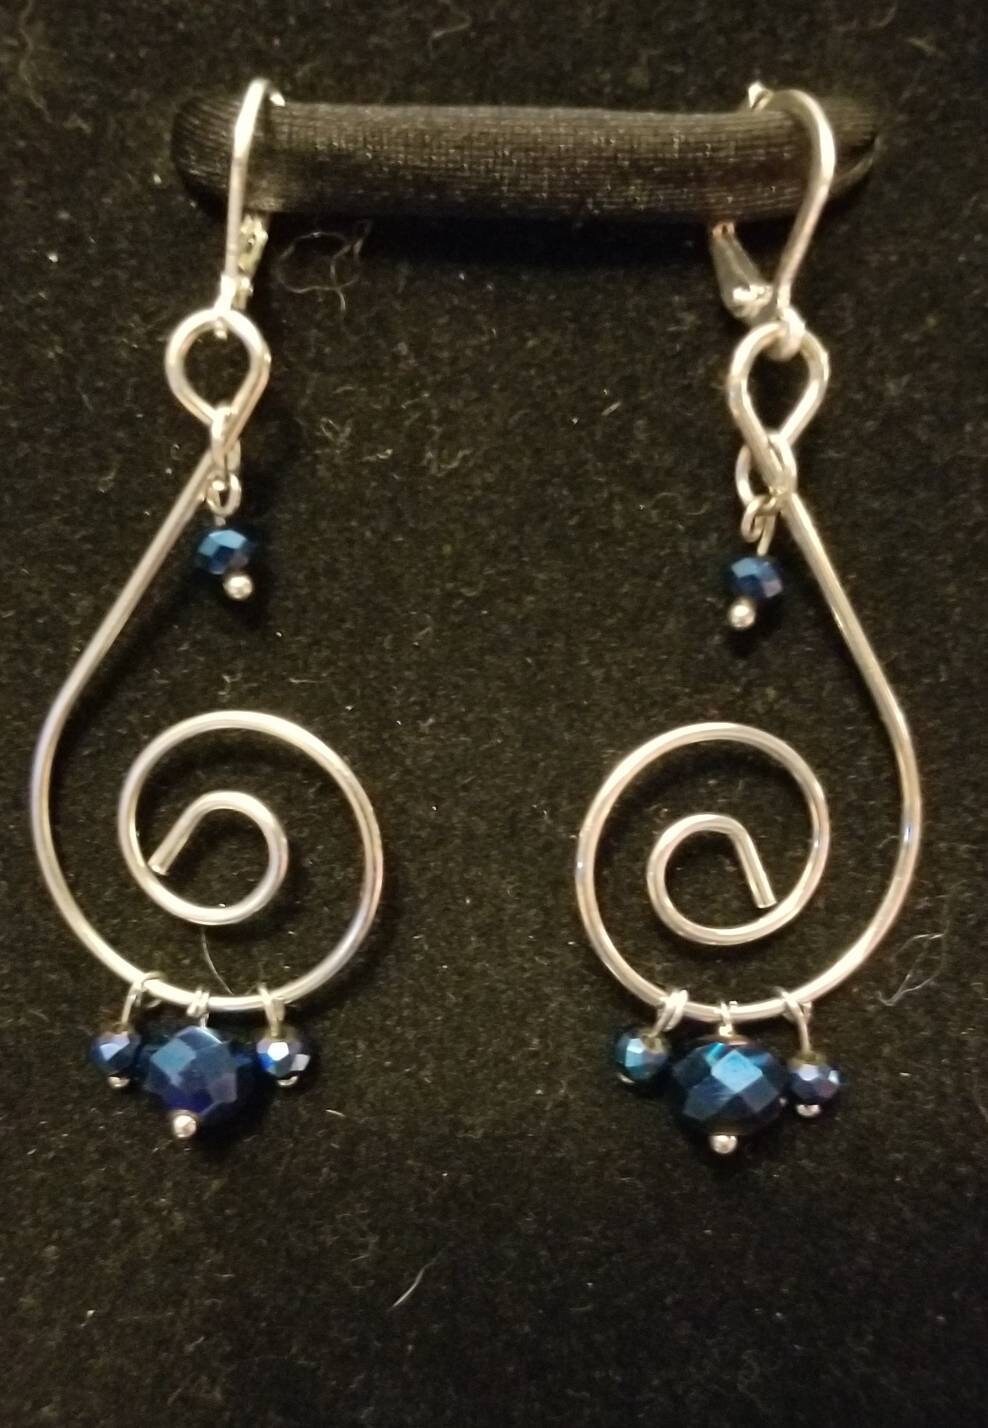 Silver and Navy swirly dangle earrings.  Super fun 2.75 inch drop for an eye catching statement!